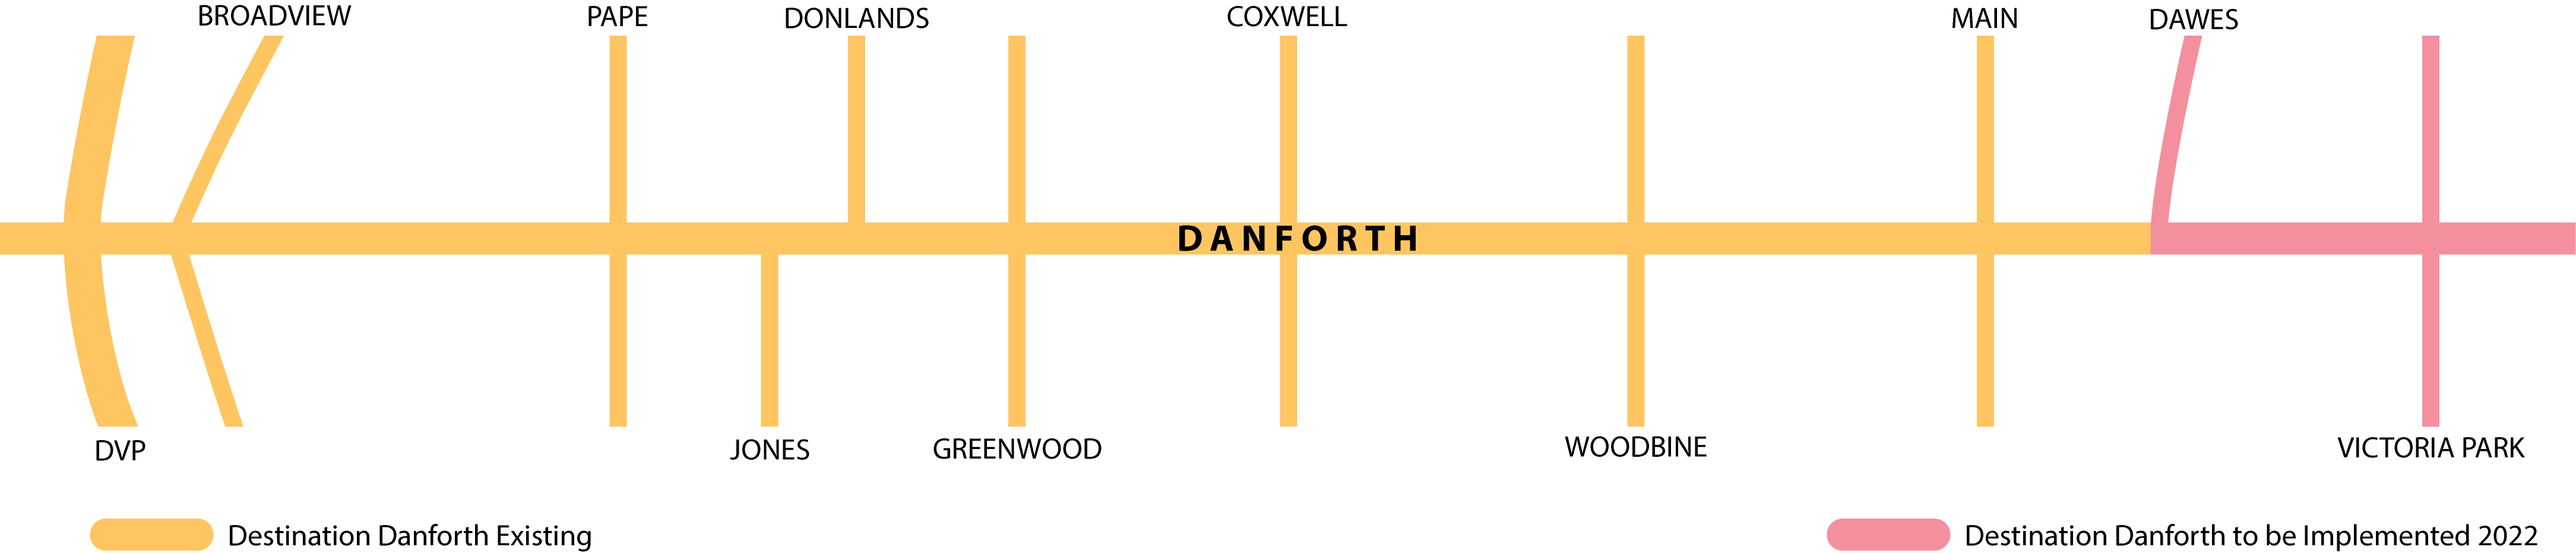 Map of Danforth Avenue Complete Streets project area